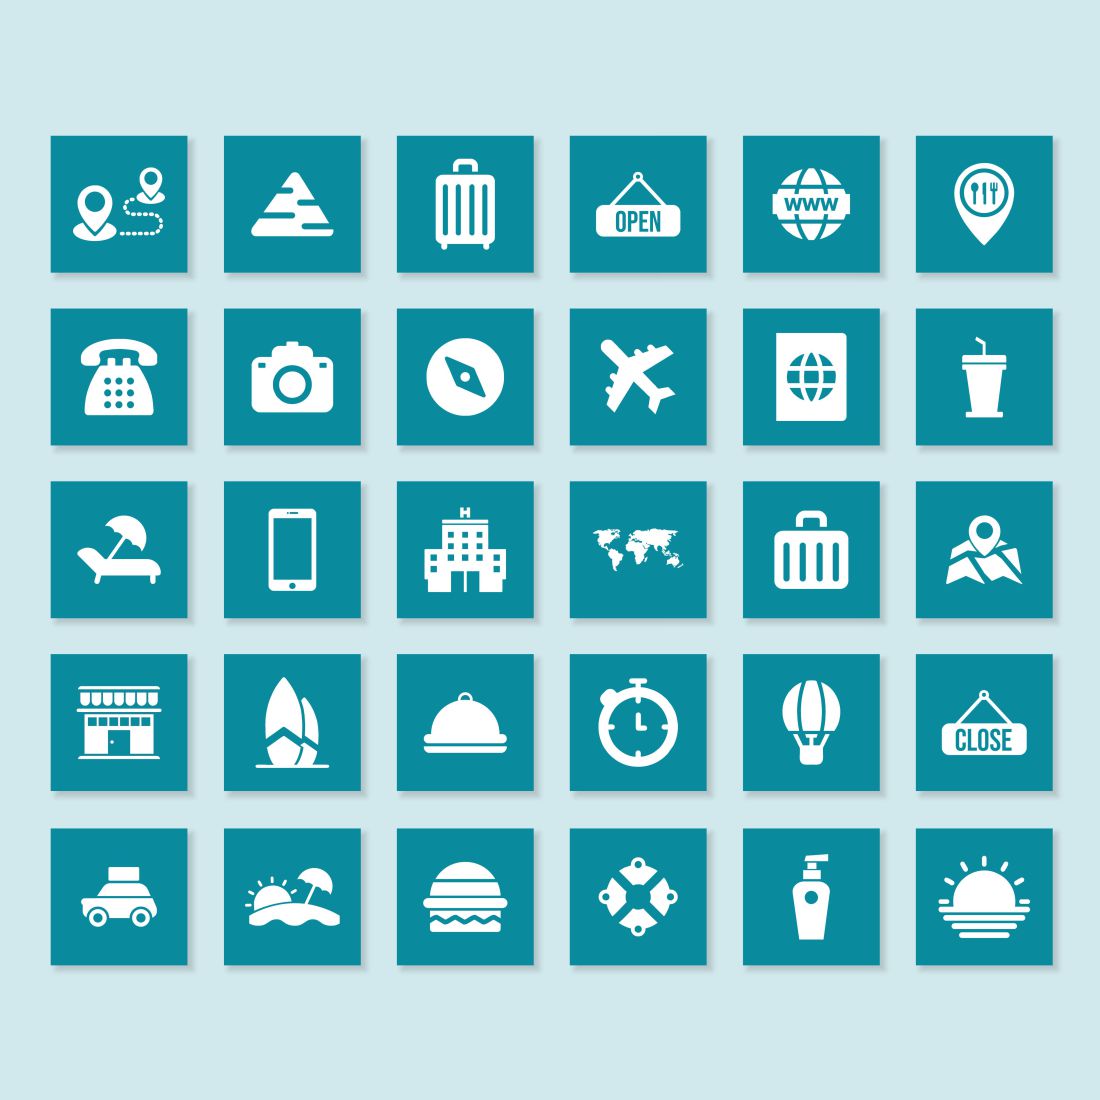 Travel Agency Canva Instagram Template Icons.